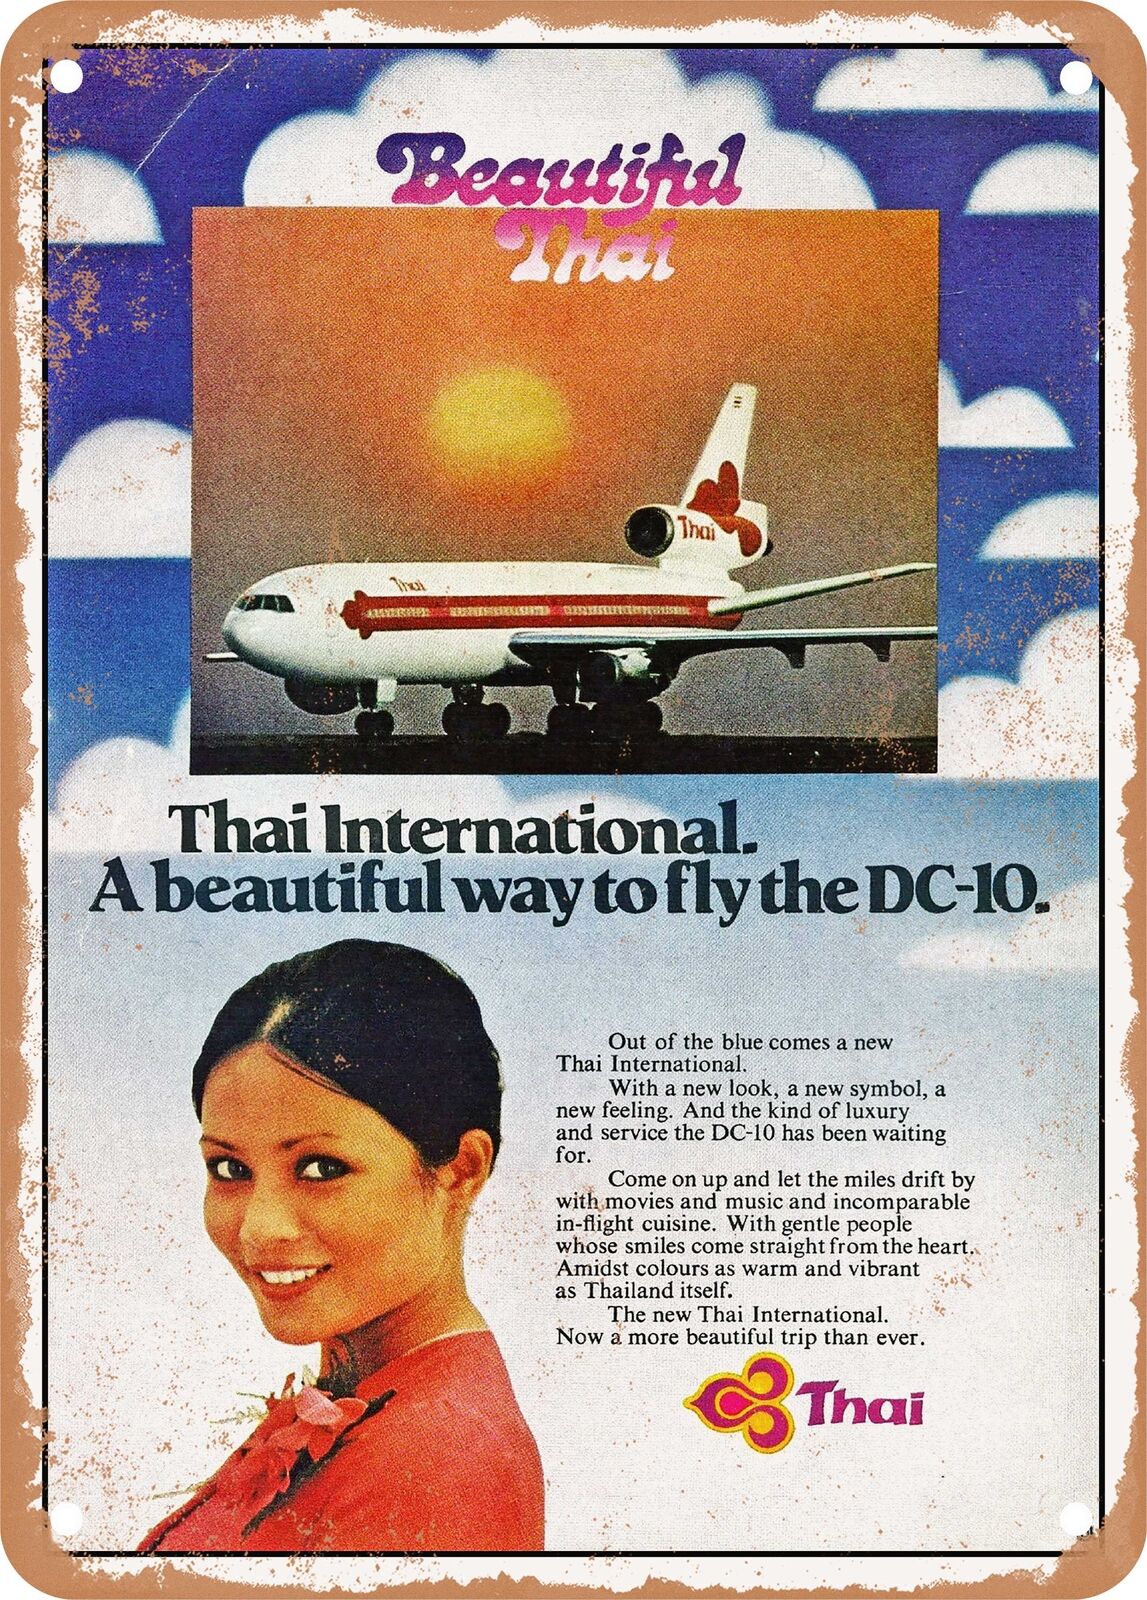 METAL SIGN - 1975 Beautiful Thai International Way to Fly the DC-10